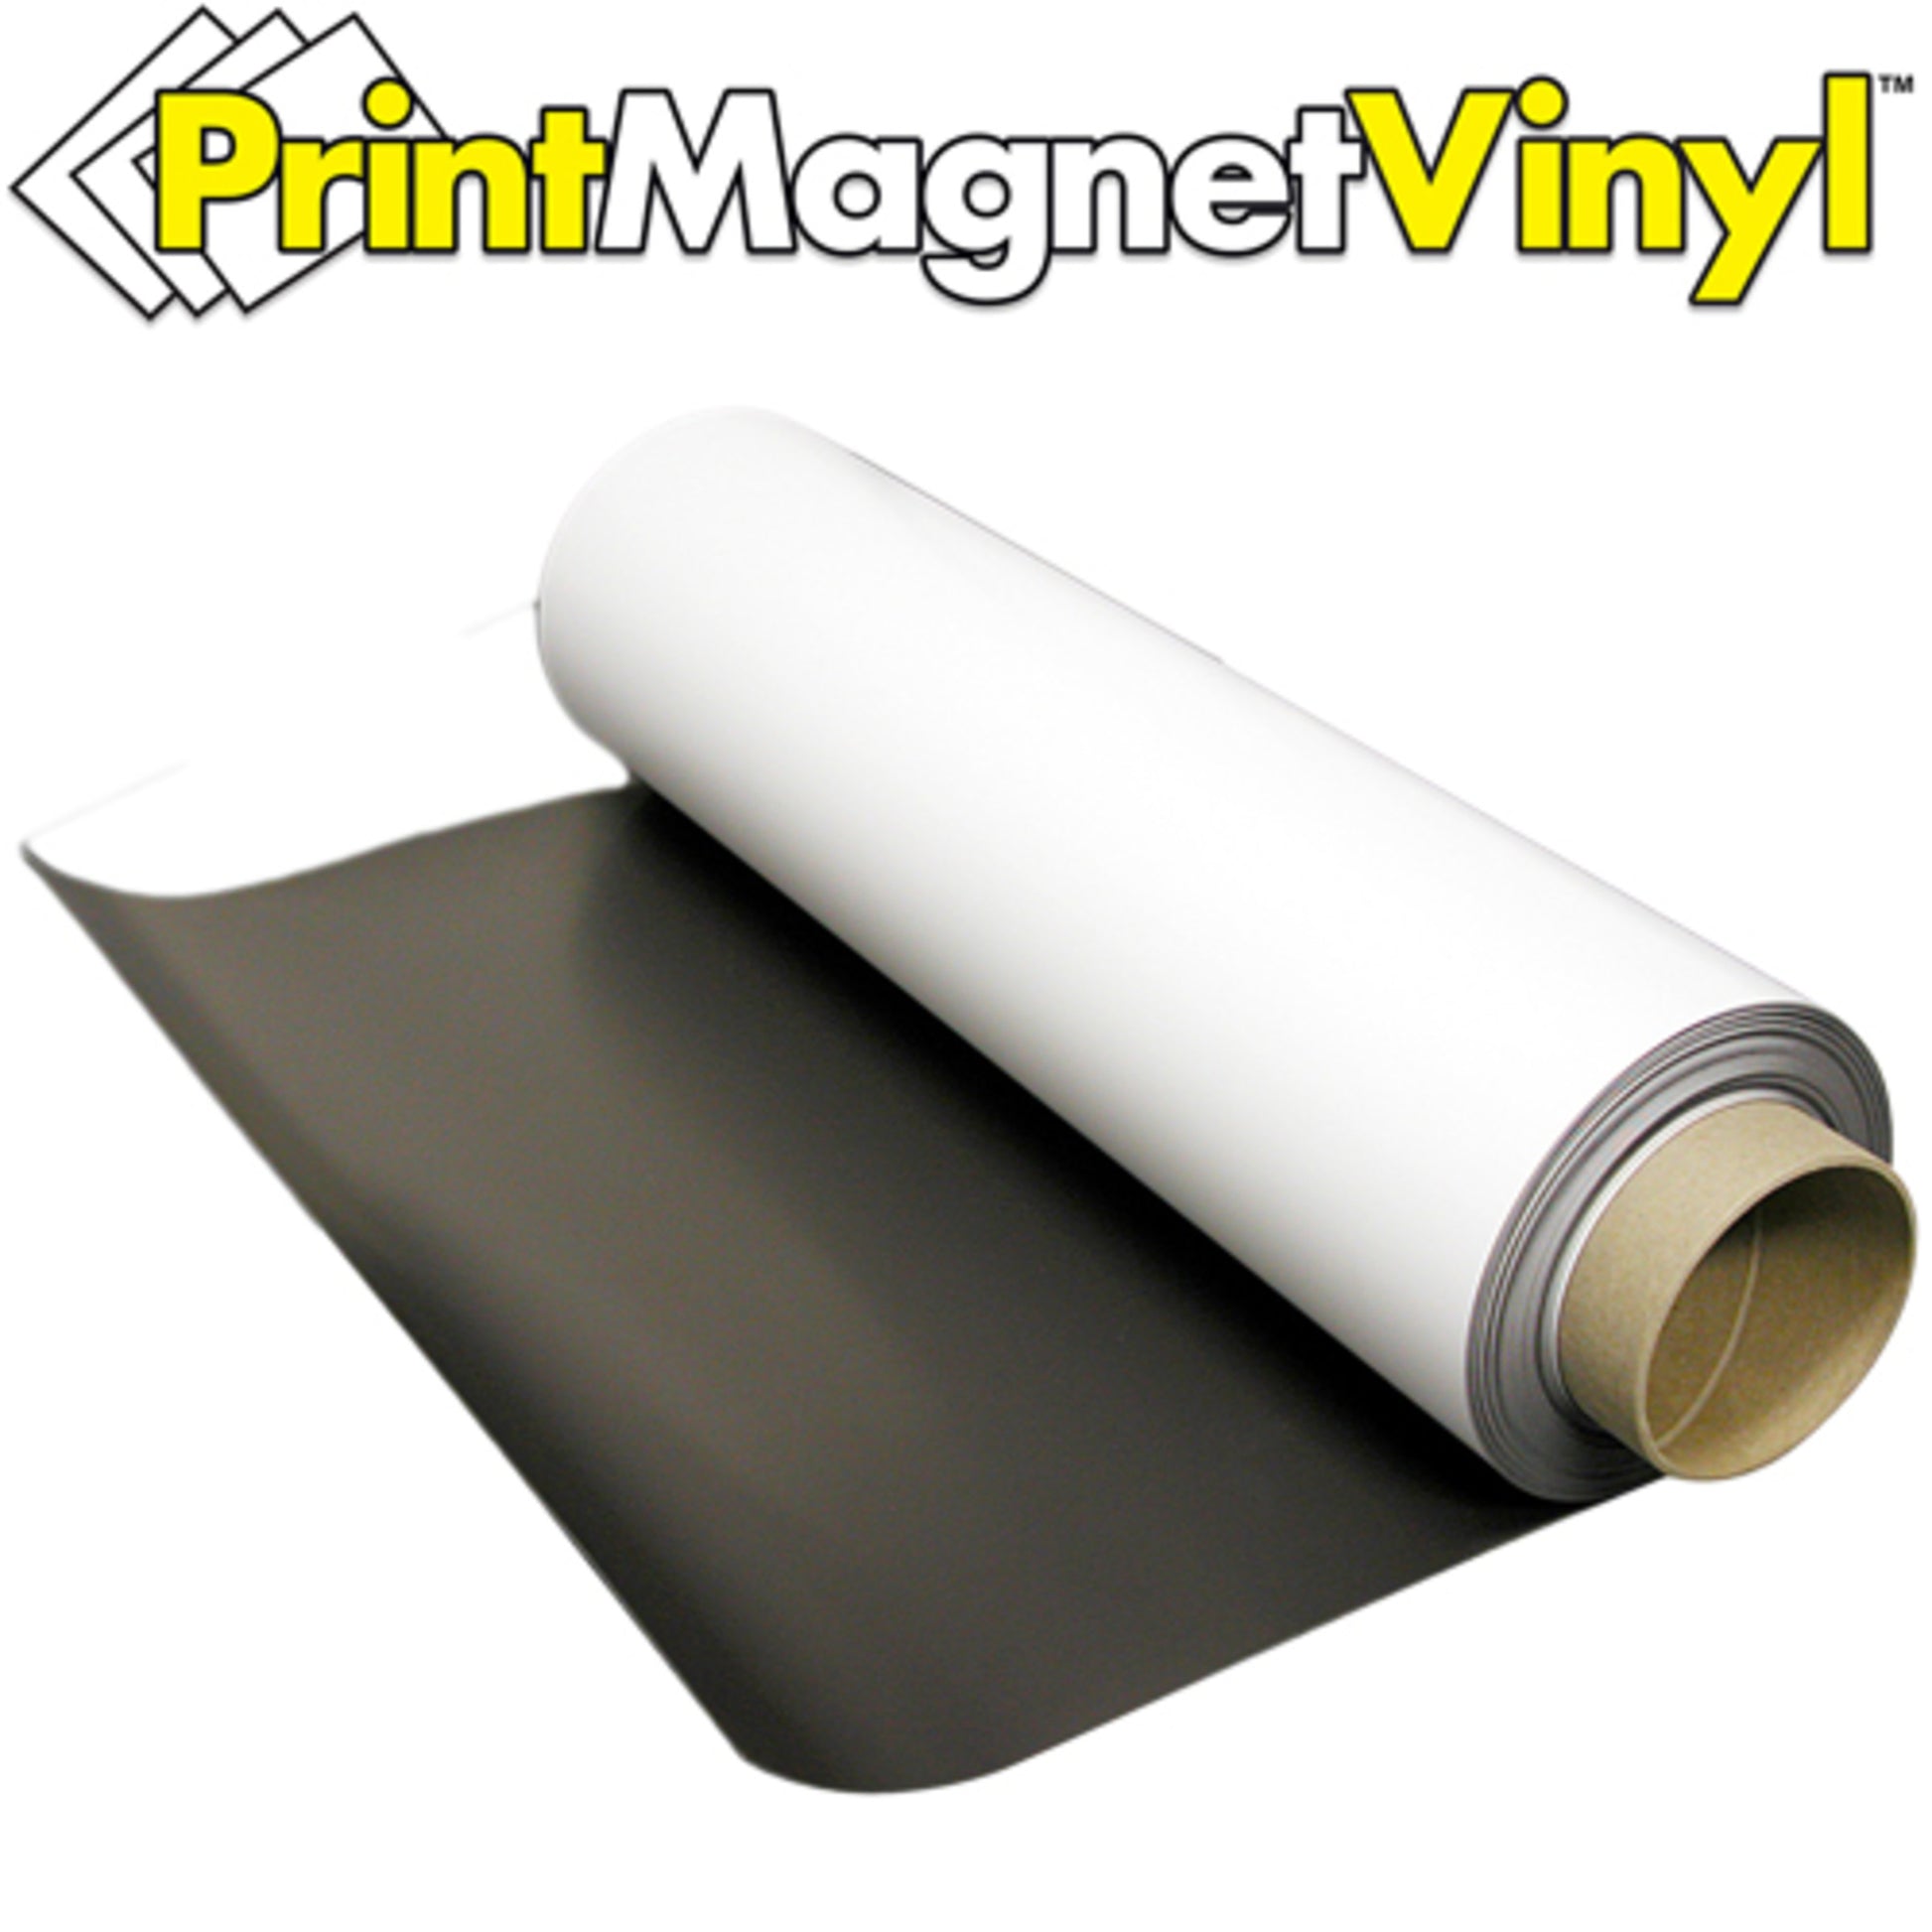 Load image into Gallery viewer, ZG4524GW50F PrintMagnetVinyl™ Flexible Magnetic Sheet - In Use